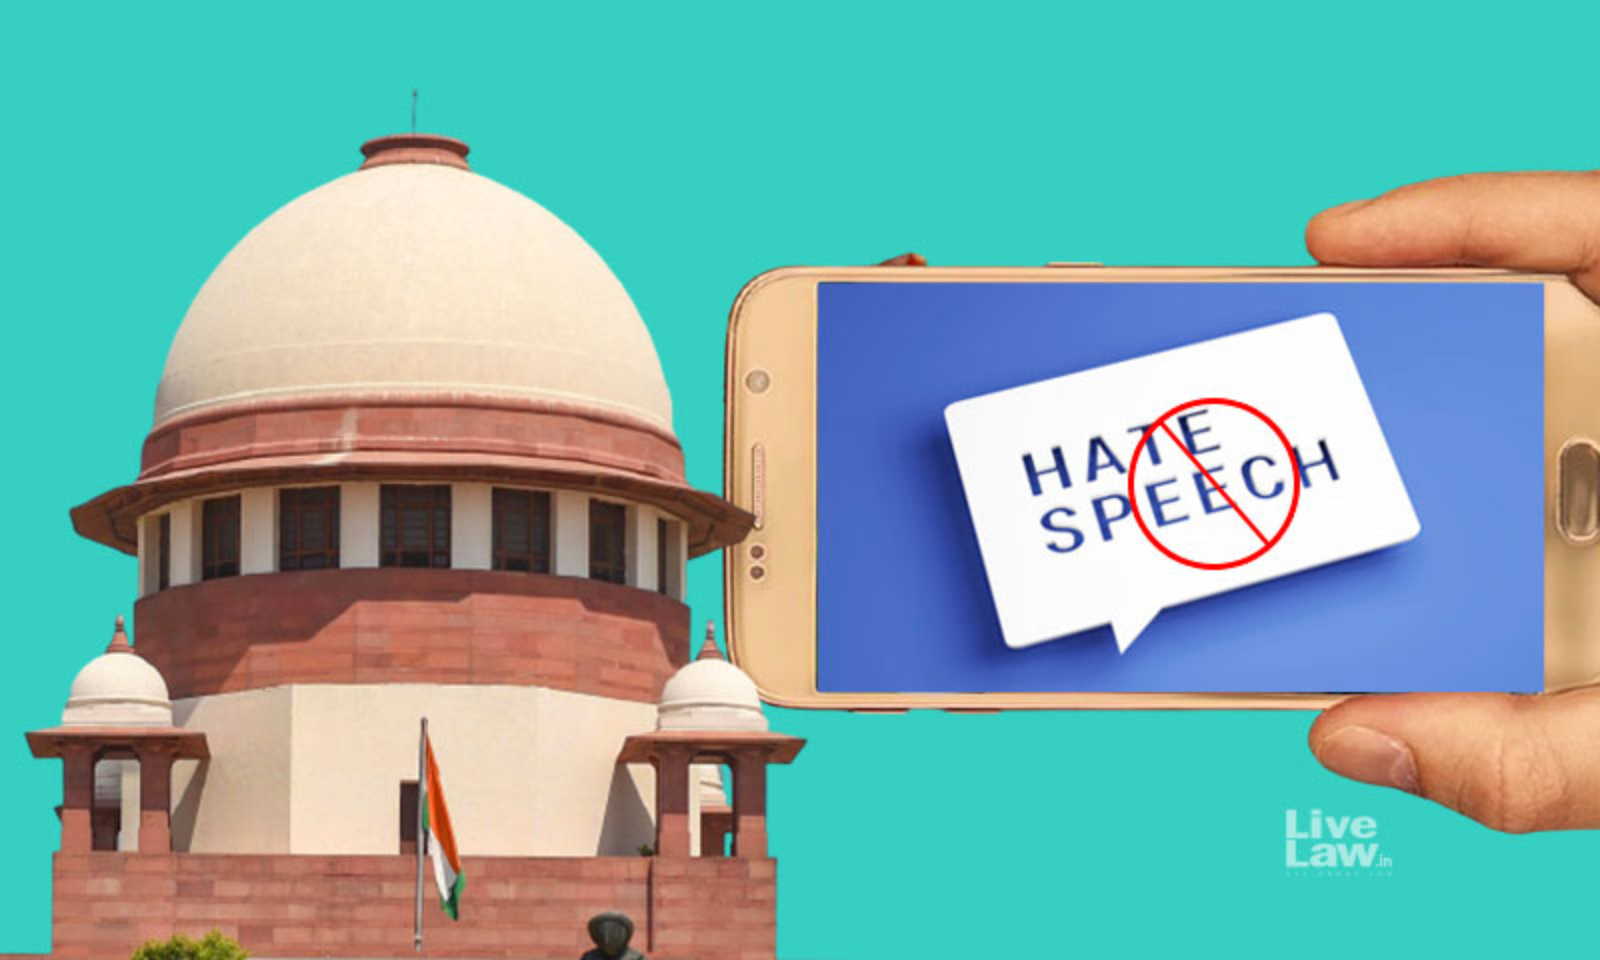 Jantar Mantar & Similar Incidents] Plea In Supreme Court Seeks Prevention  Of Pre-Announced Hate Speeches By Conferring Duty On Public Authorities